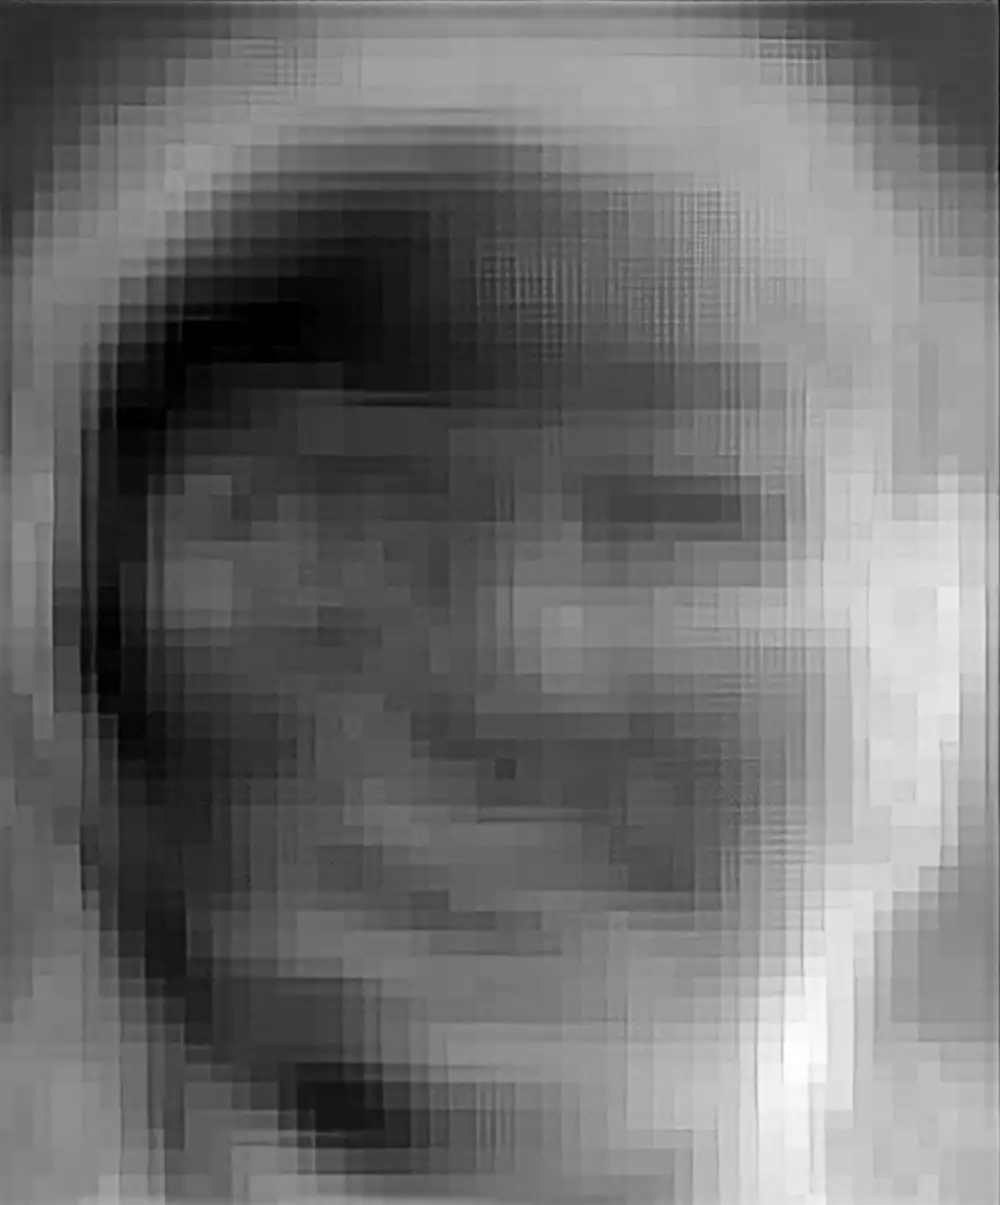 A sequence of four photos showing blurred faces, where facial features are either lightened or darkened in regions like the eye cavities or mouth area.